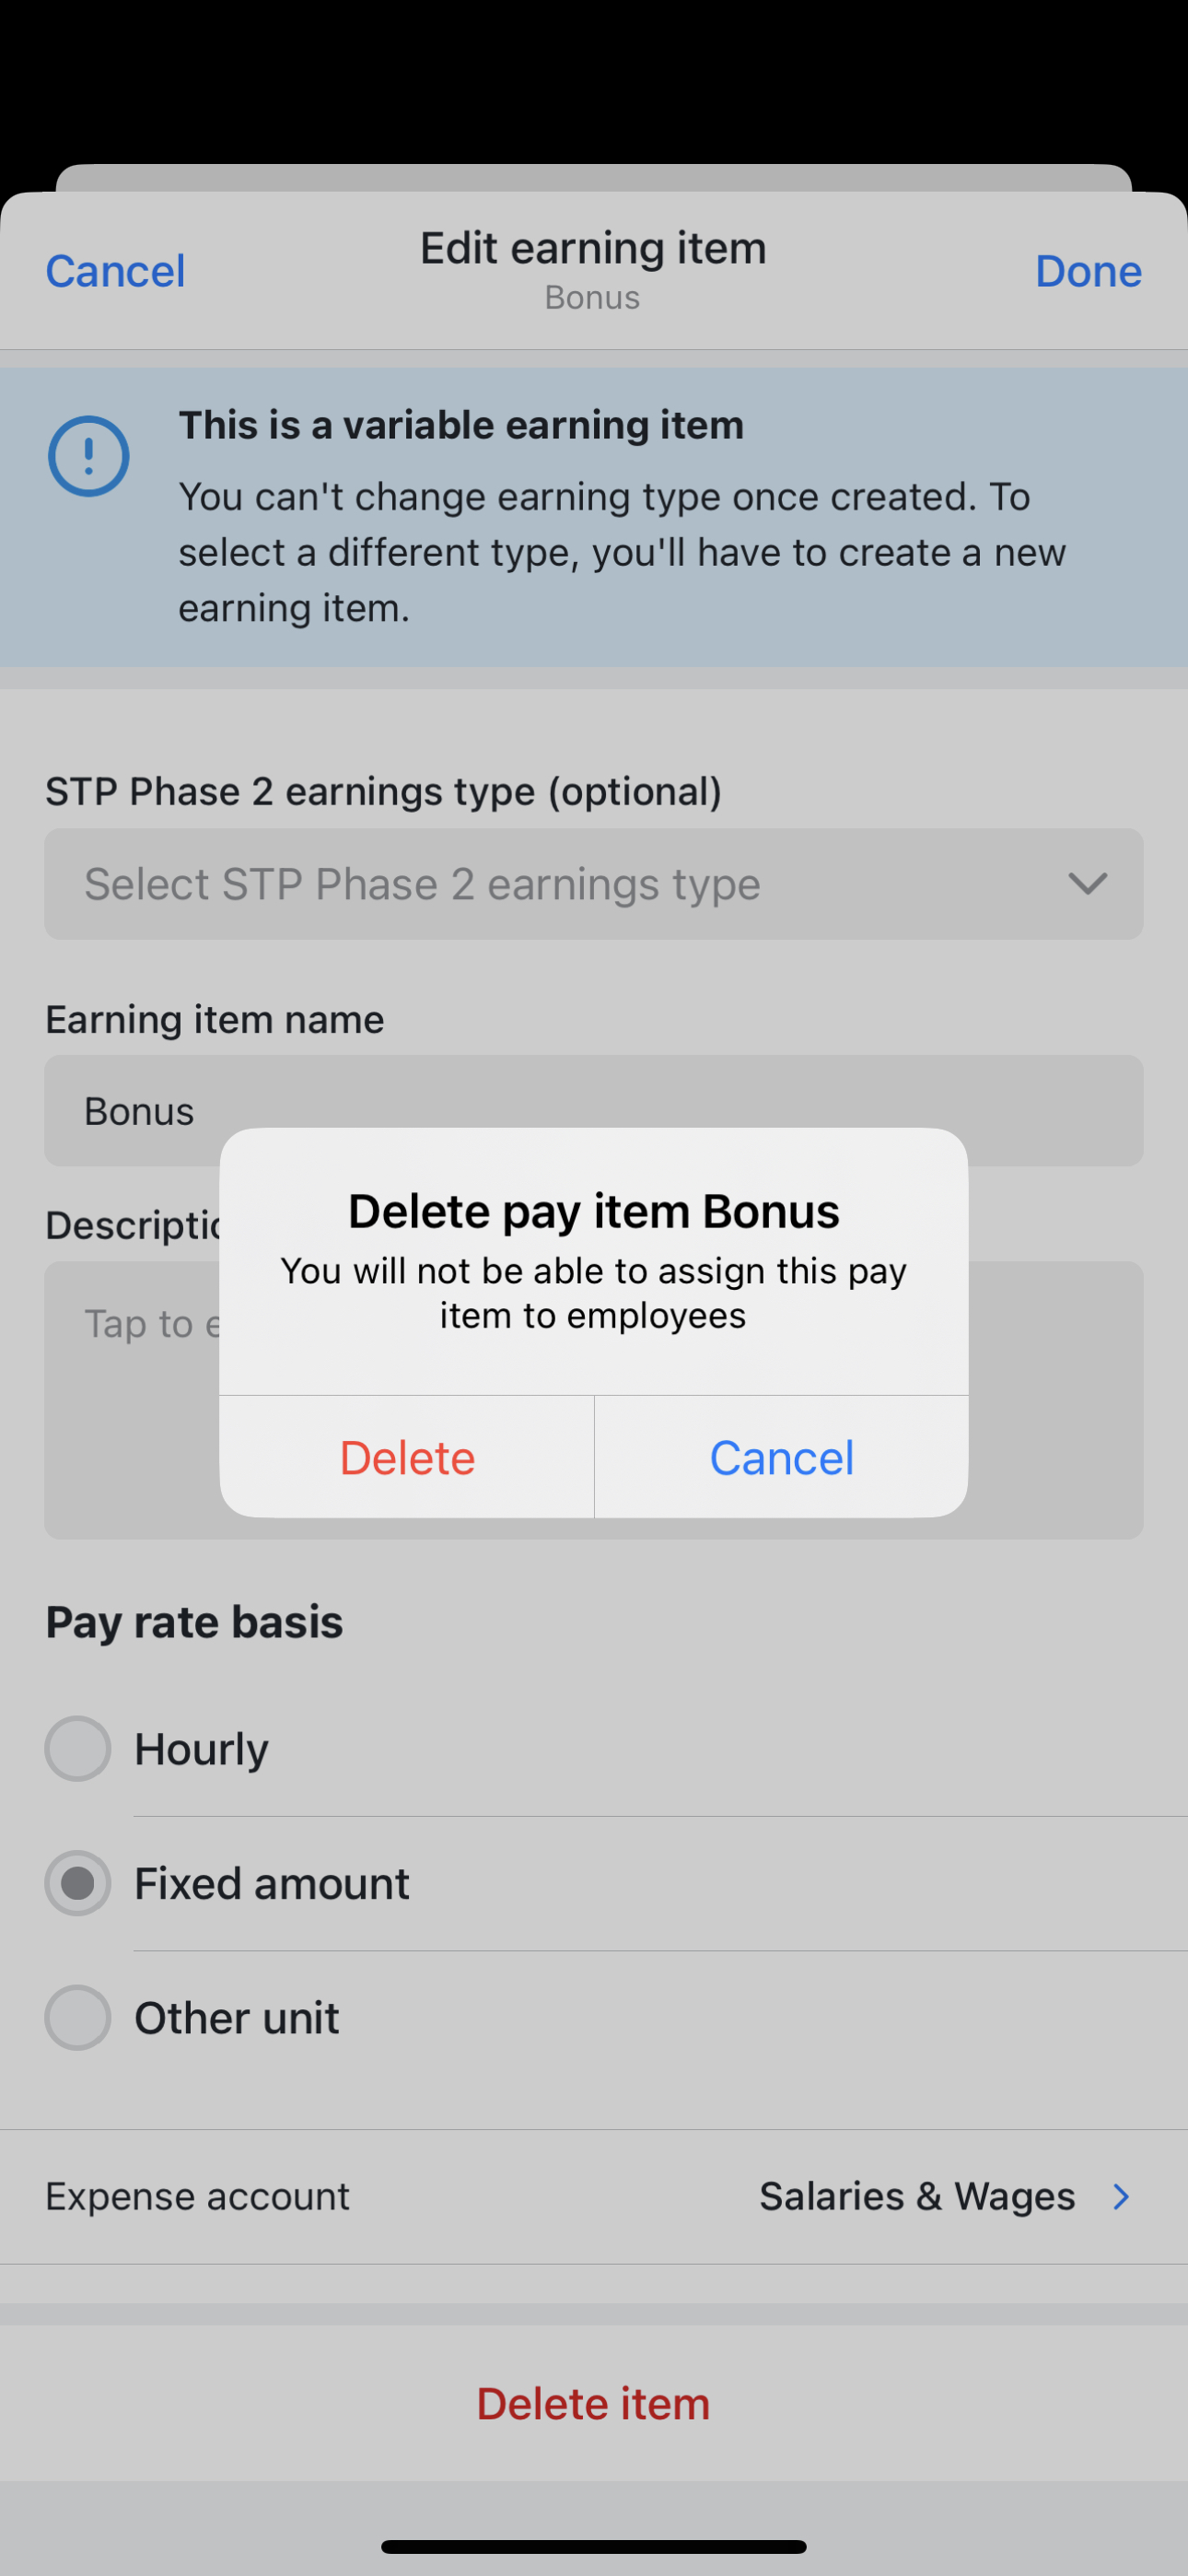 Confirm deletion of earning item